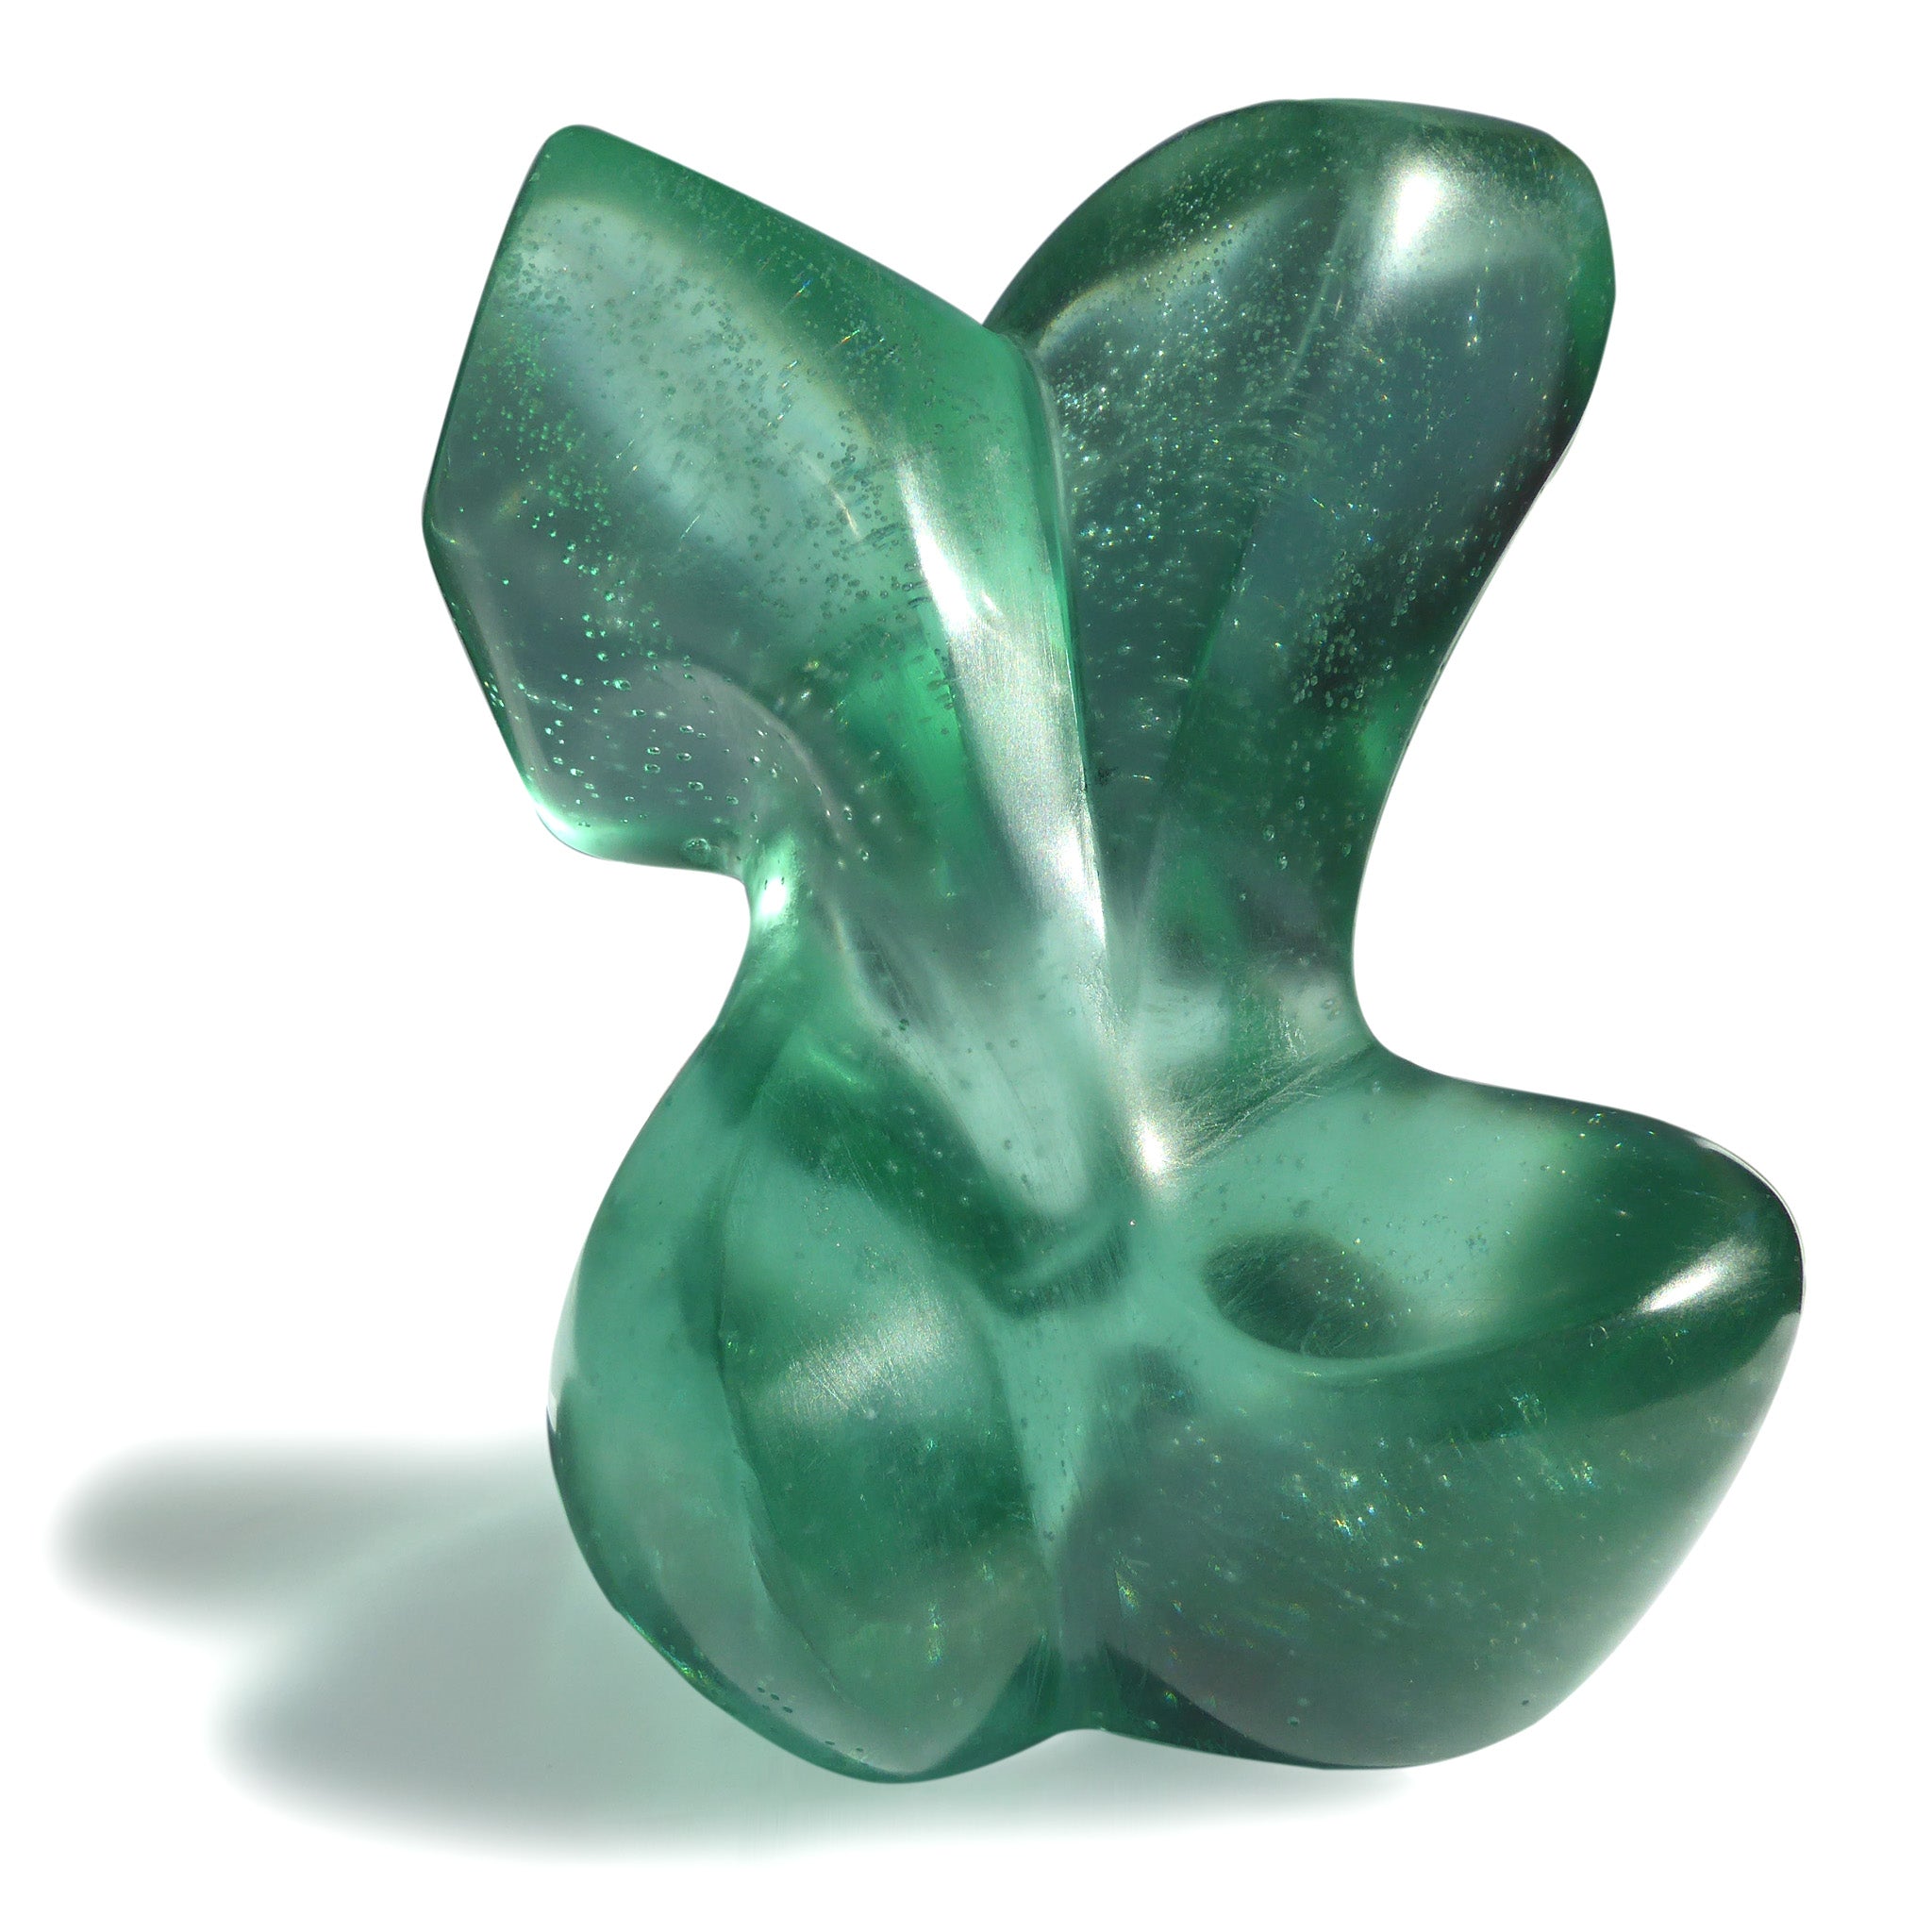 Abstract female figurative cast glass sculpture for sale by Stephen Williams.